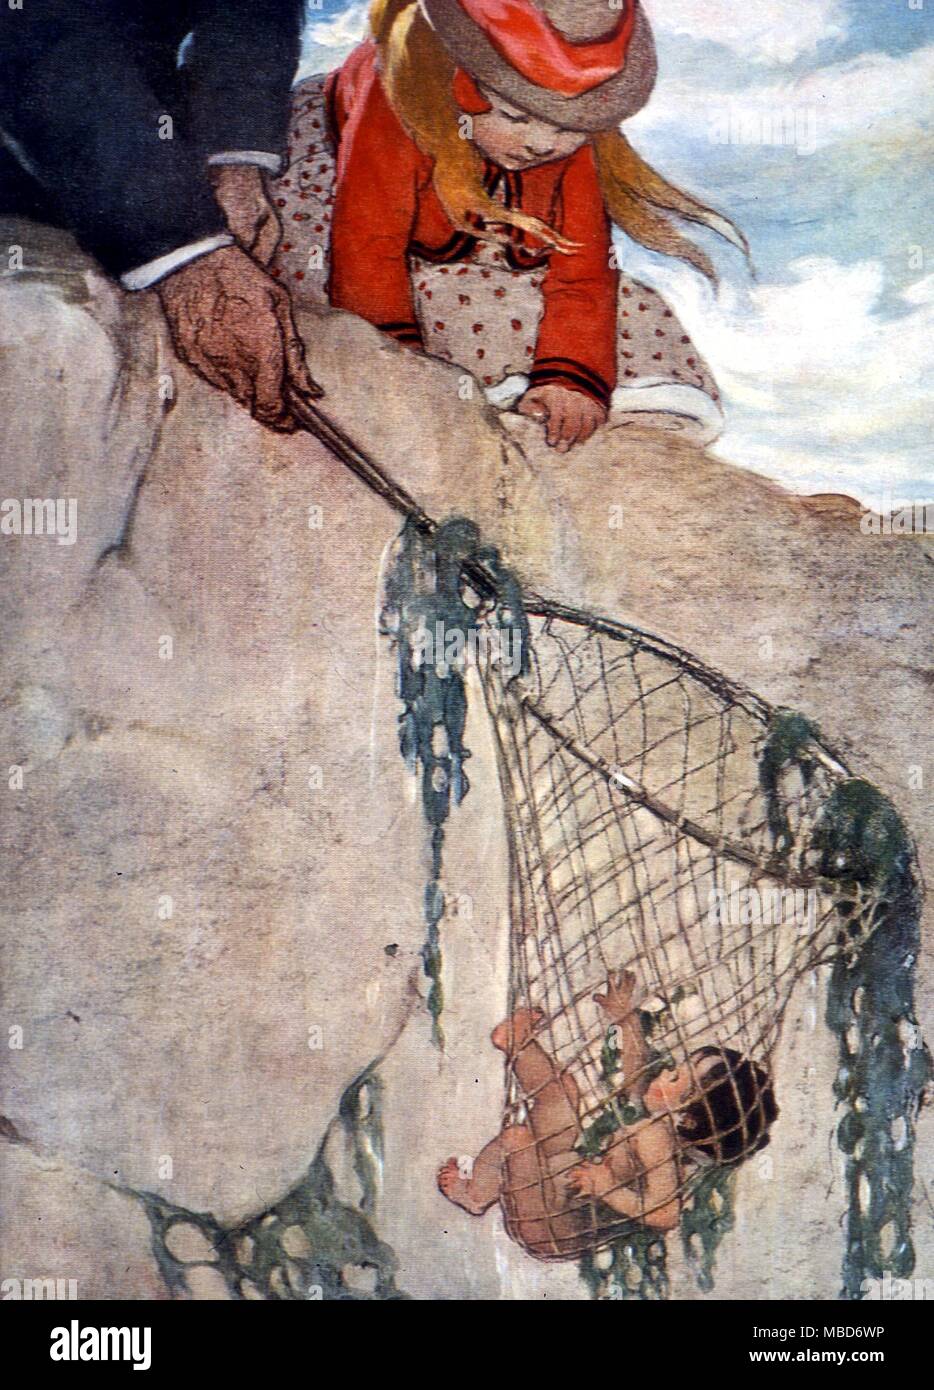 Water Babies - illustration by J. W. Smith for Charles Kingsley's The Water Babies - nd but circa 1920. He felt the net very heavy; and lifted it out quickly, with Tom all entangeld in the meshes. Stock Photo